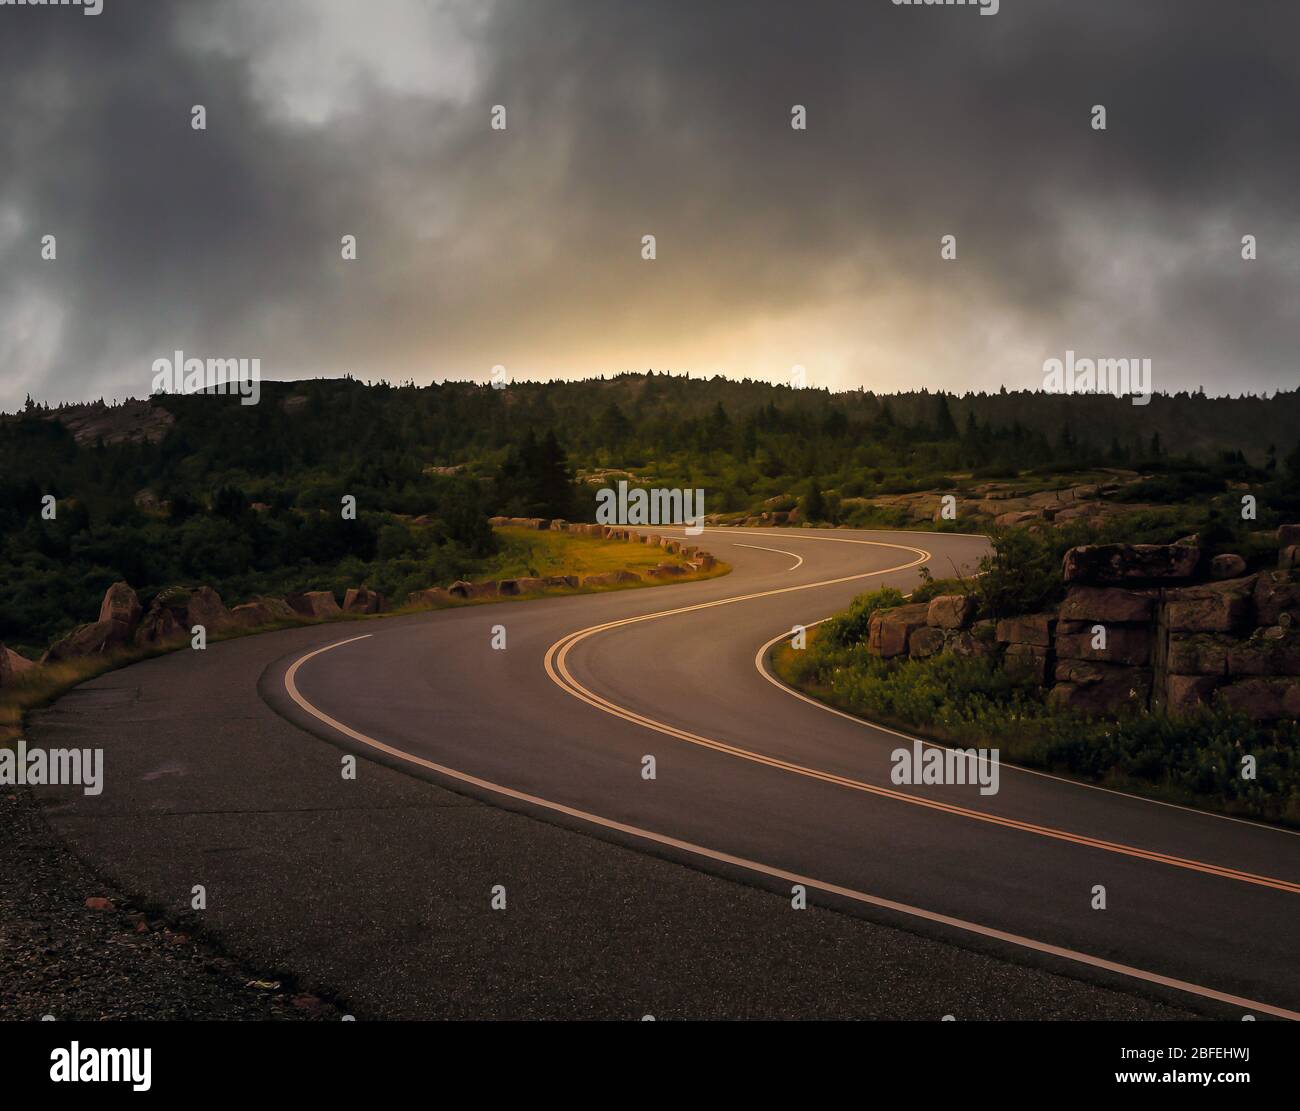 Cadillac Mountain road in Acadia National Park with curved road Stock Photo